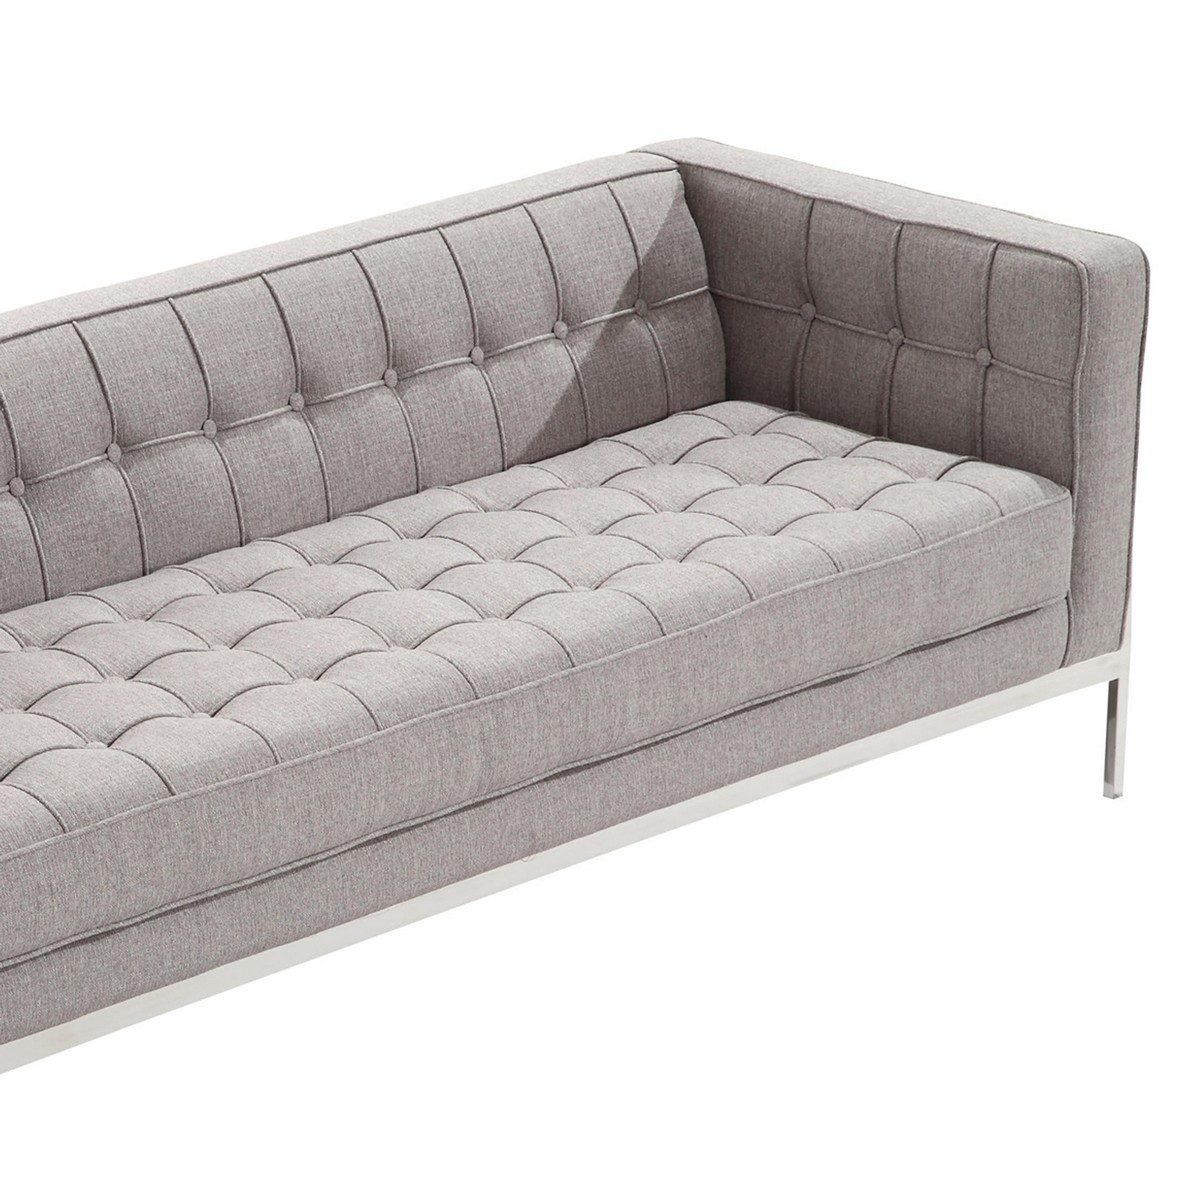 Armen Living Andre Contemporary Sofa In Gray Tweed and Stainless Steel